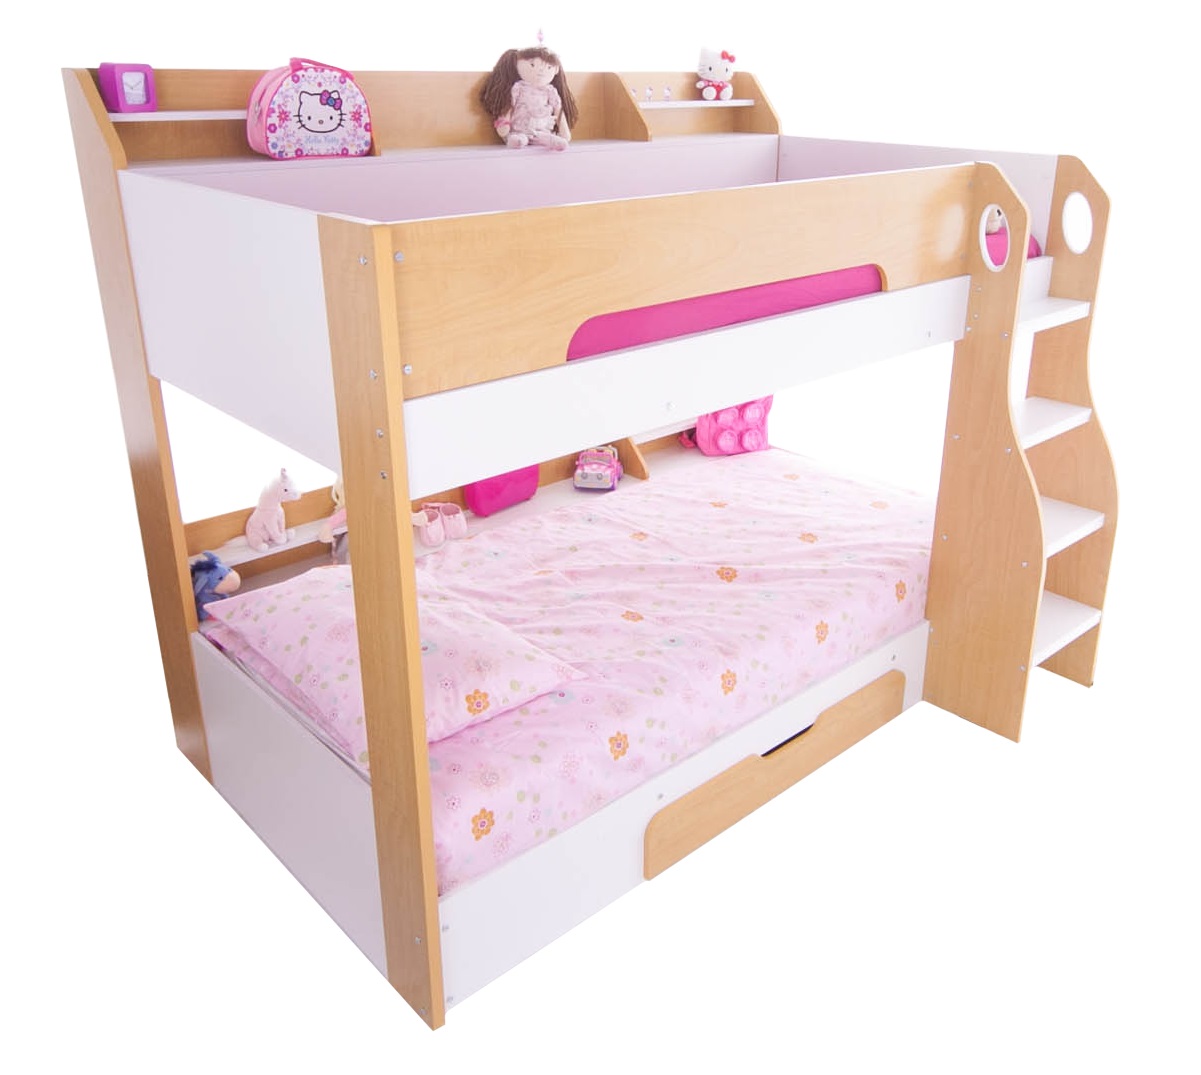 Flair Furnishings Flick Bunk bed Maple